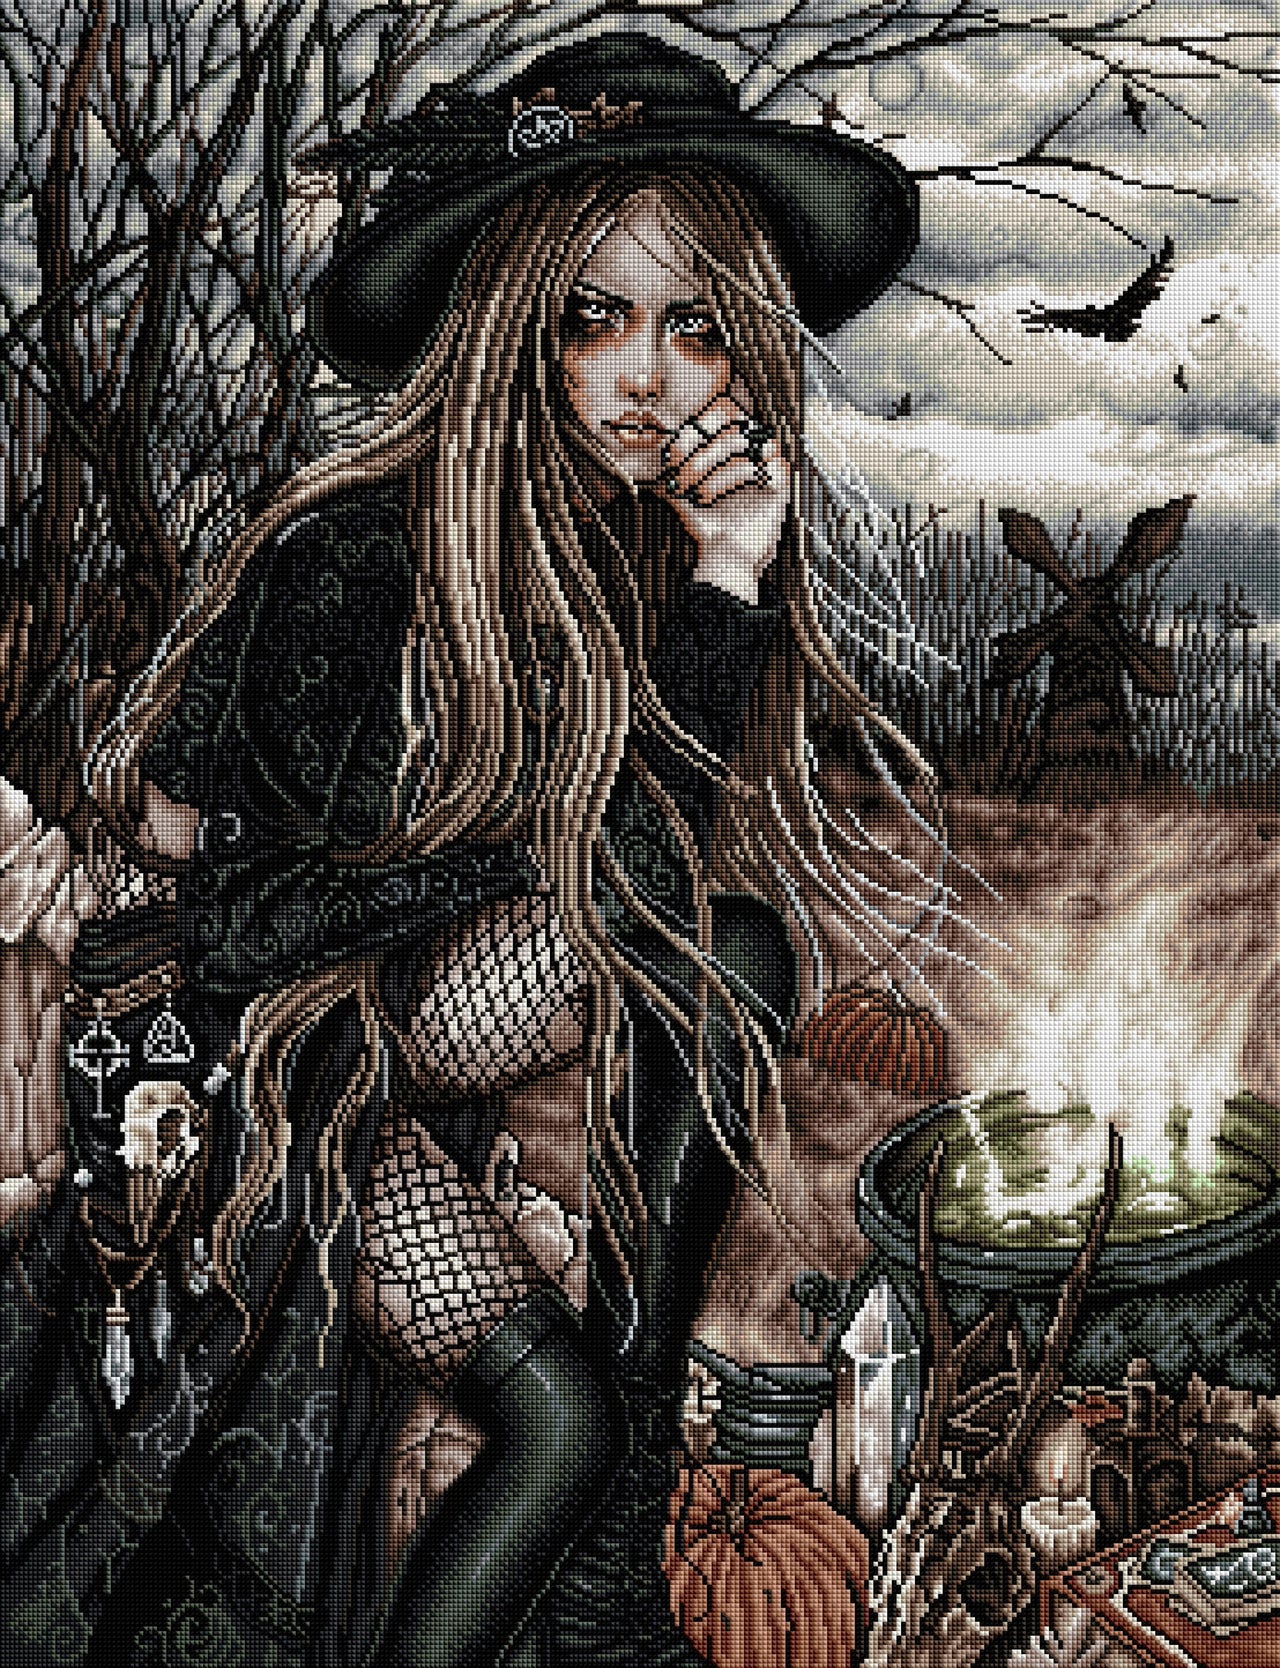 Diamond Painting The Season of the Witch 27.6" x 35.8″ (70cm x 91cm) / Square with 37 Colors including 1 AB / 99,997